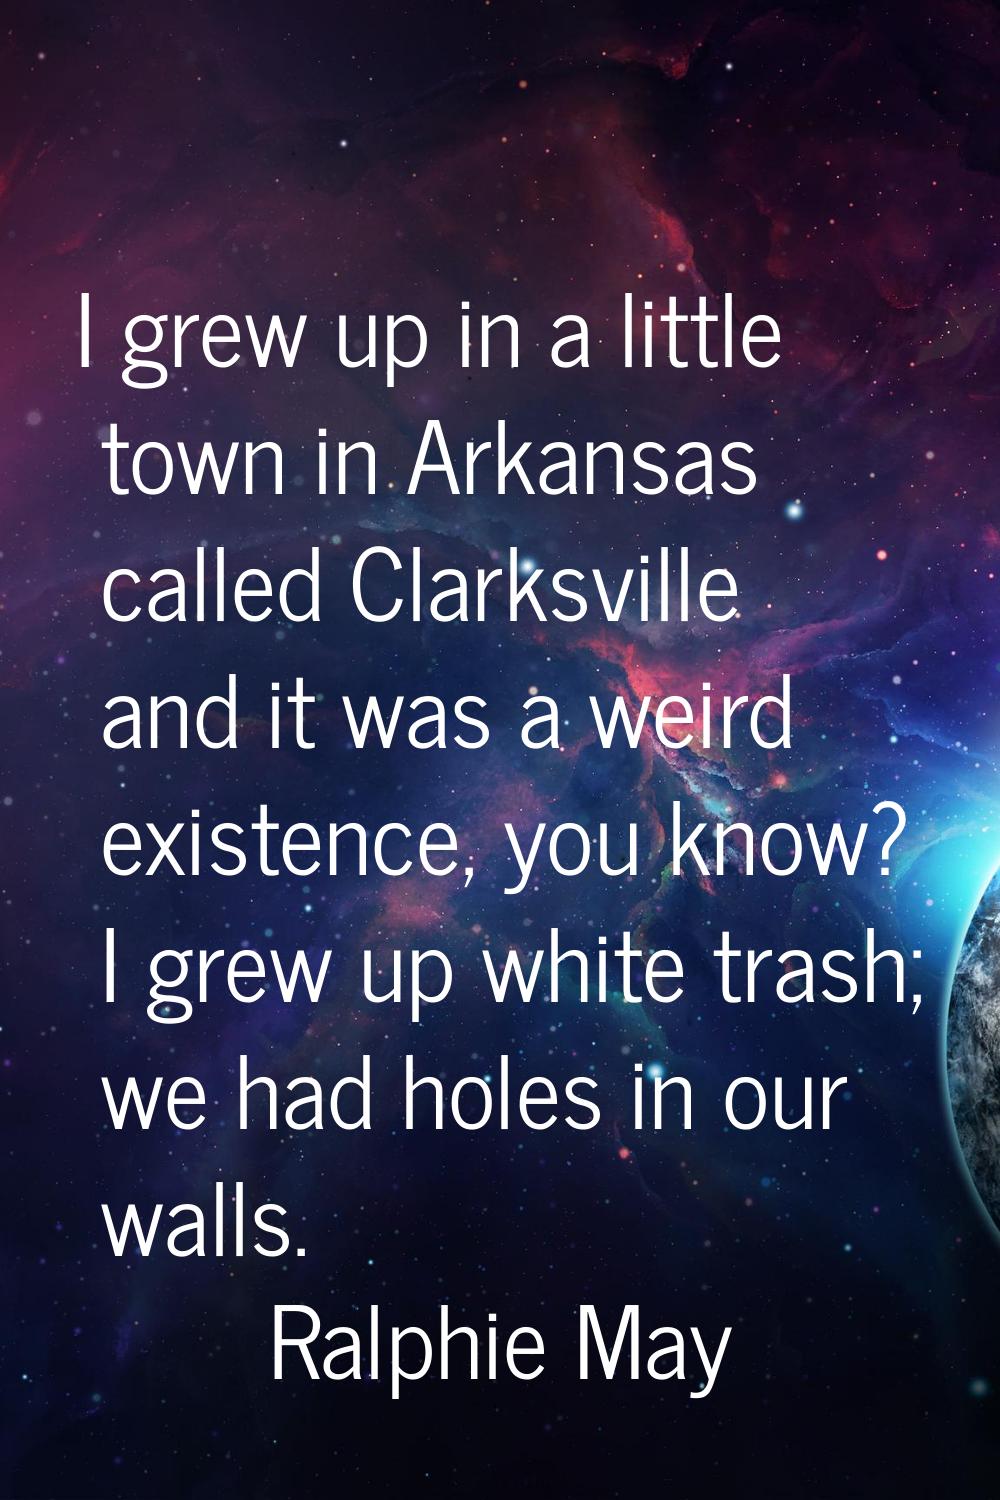 I grew up in a little town in Arkansas called Clarksville and it was a weird existence, you know? I